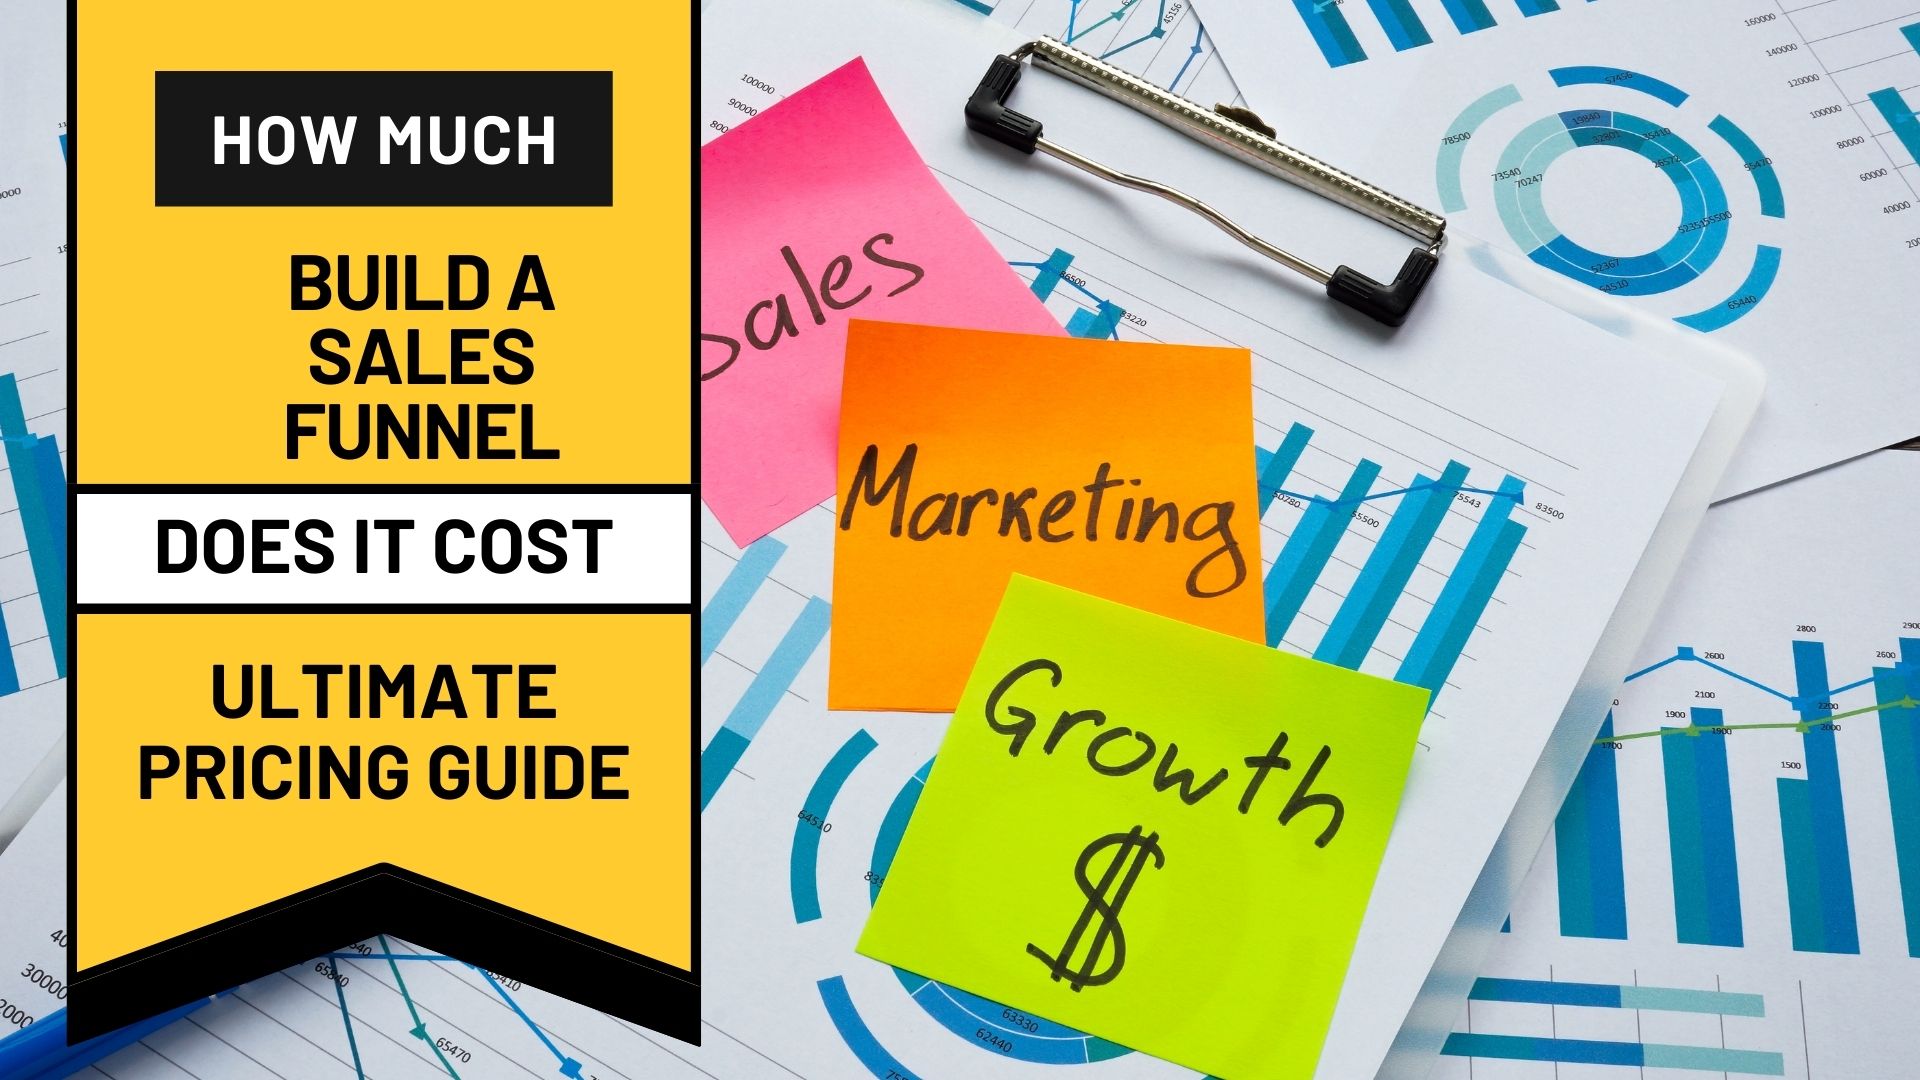 How Much Does It Cost to Build a Sales Funnel